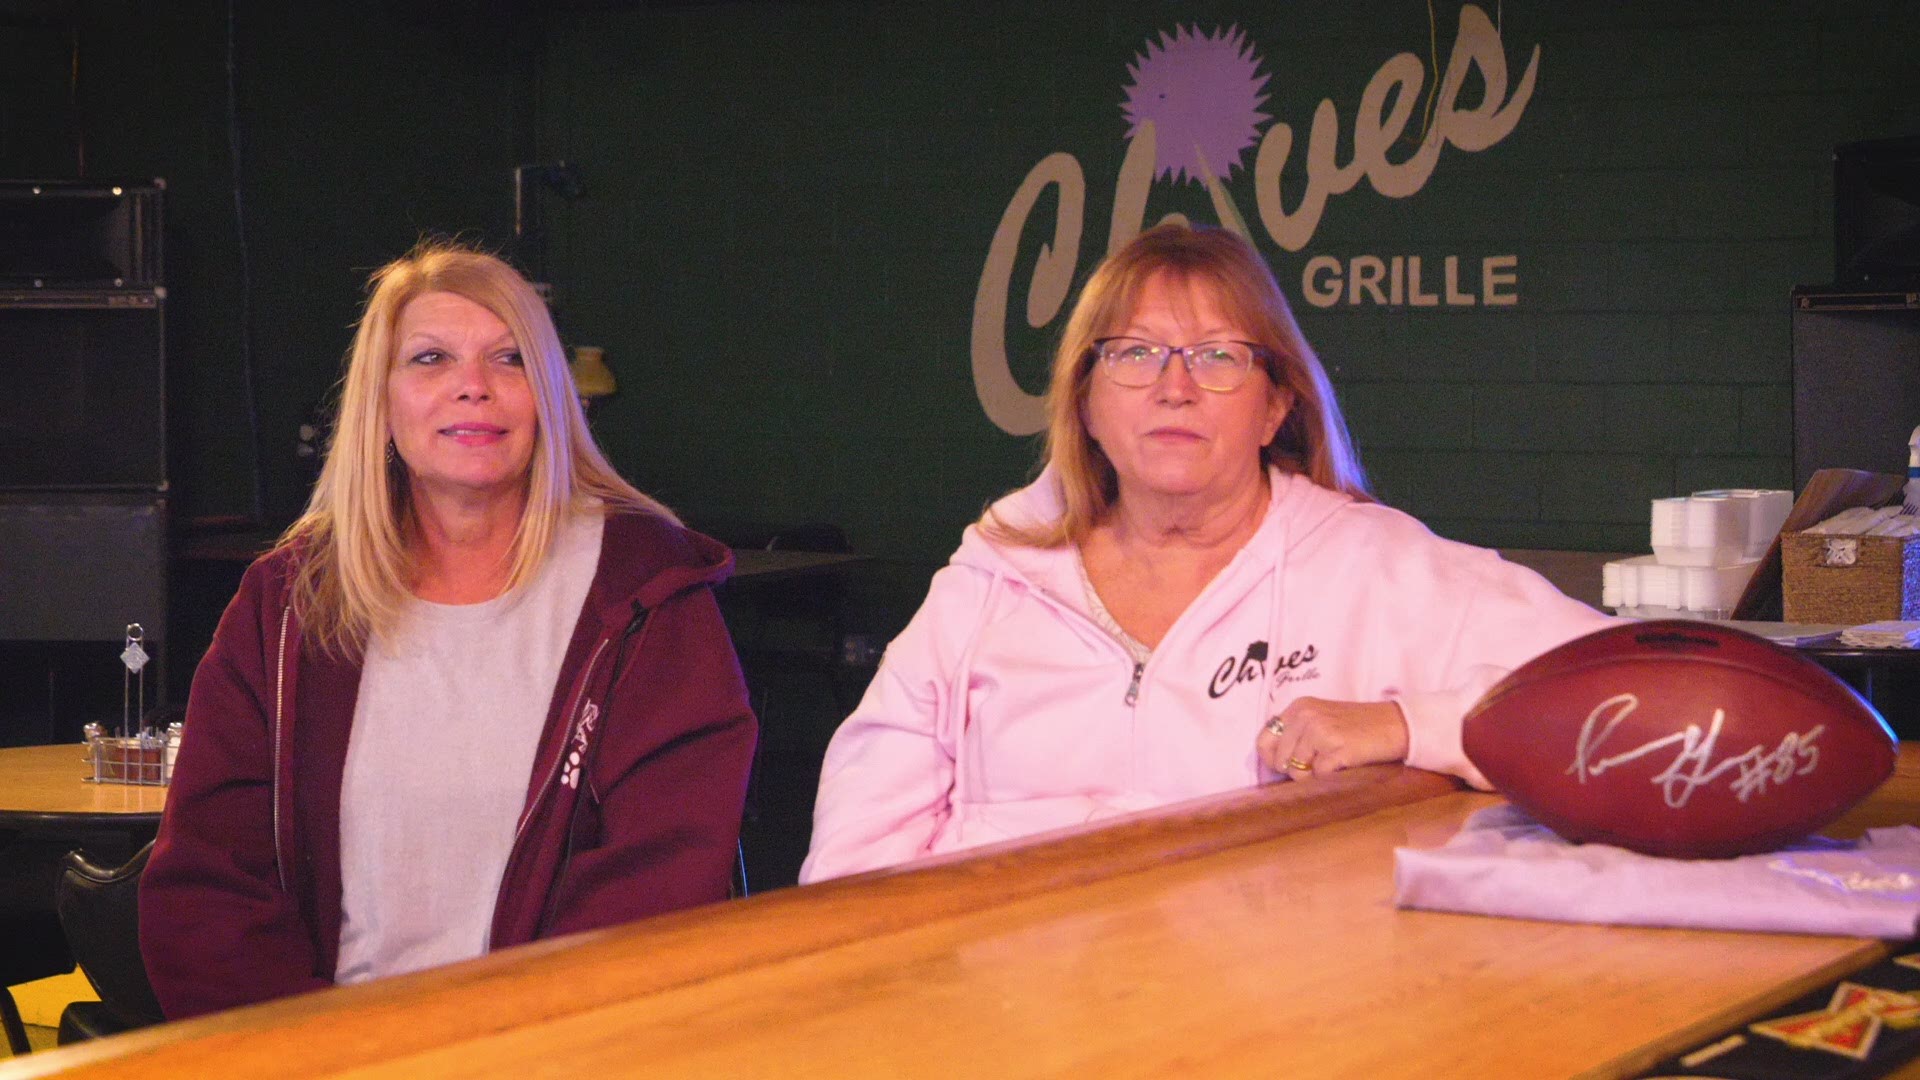 Chives Grille in Alliance, Ohio, is making its pitch to receive money from the Barstool Fund.